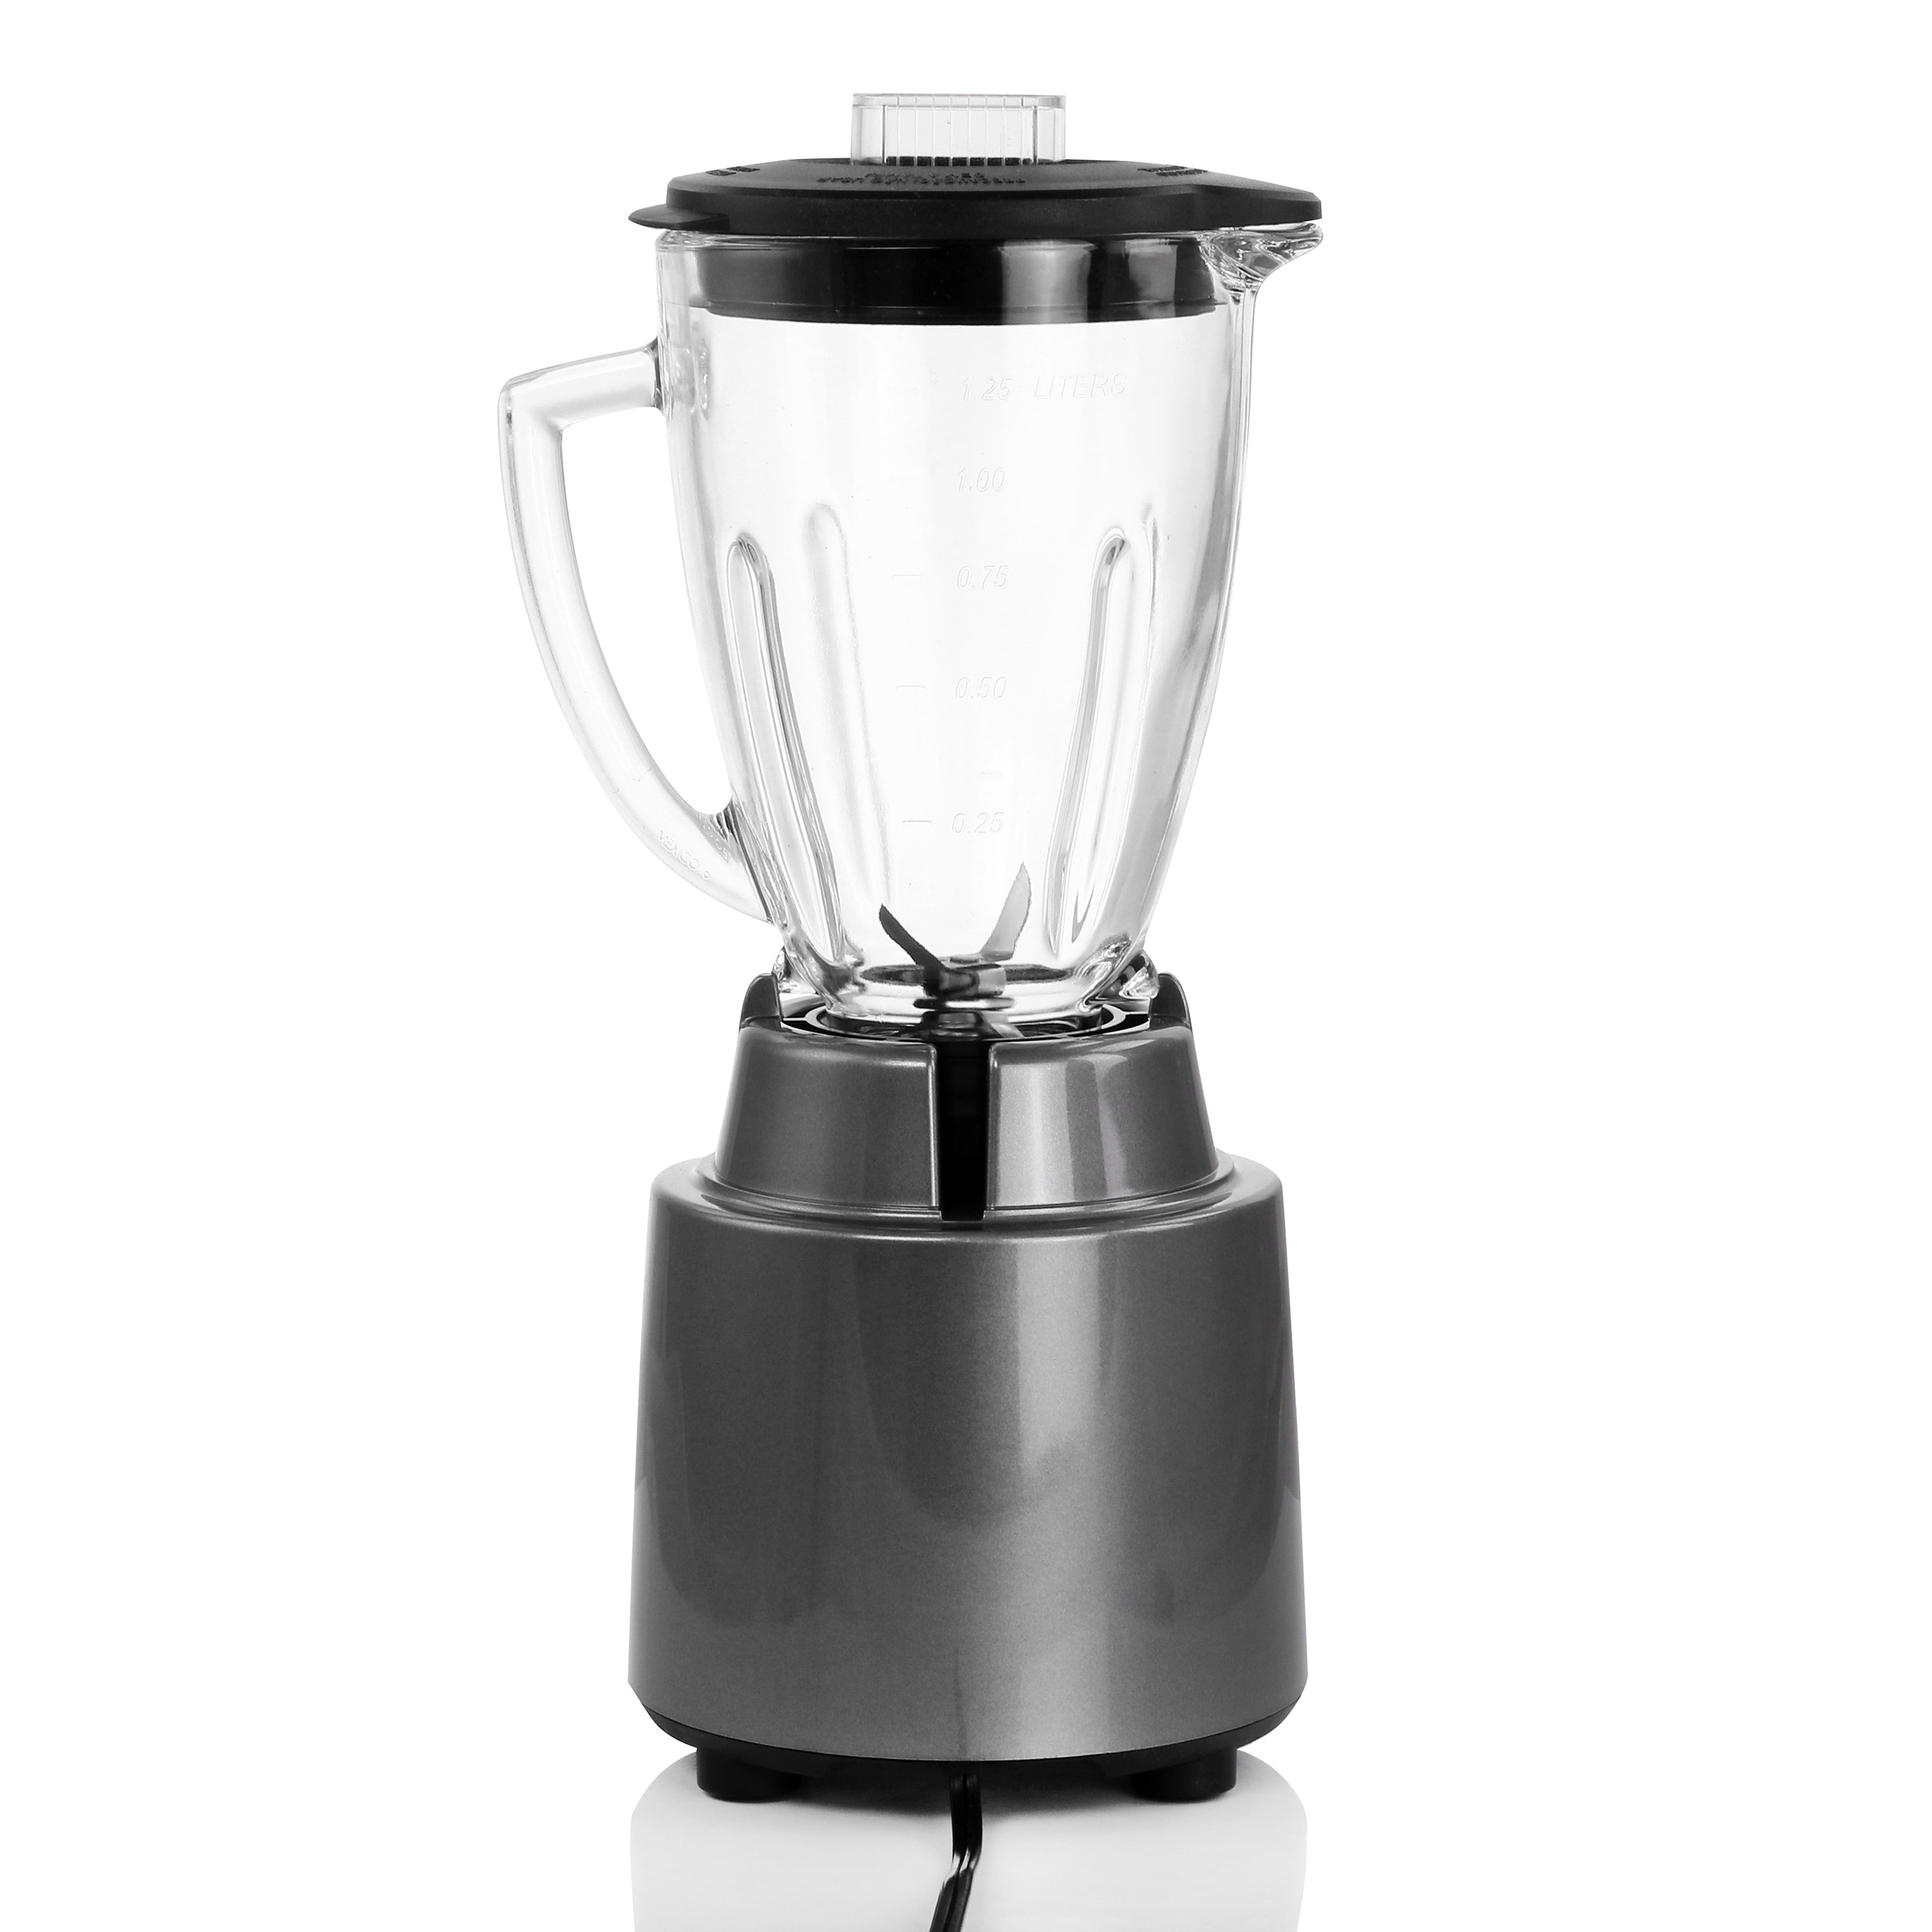 Oster 6 Cup 8 Speed Blender with Glass Jar in Gray - image 3 of 3